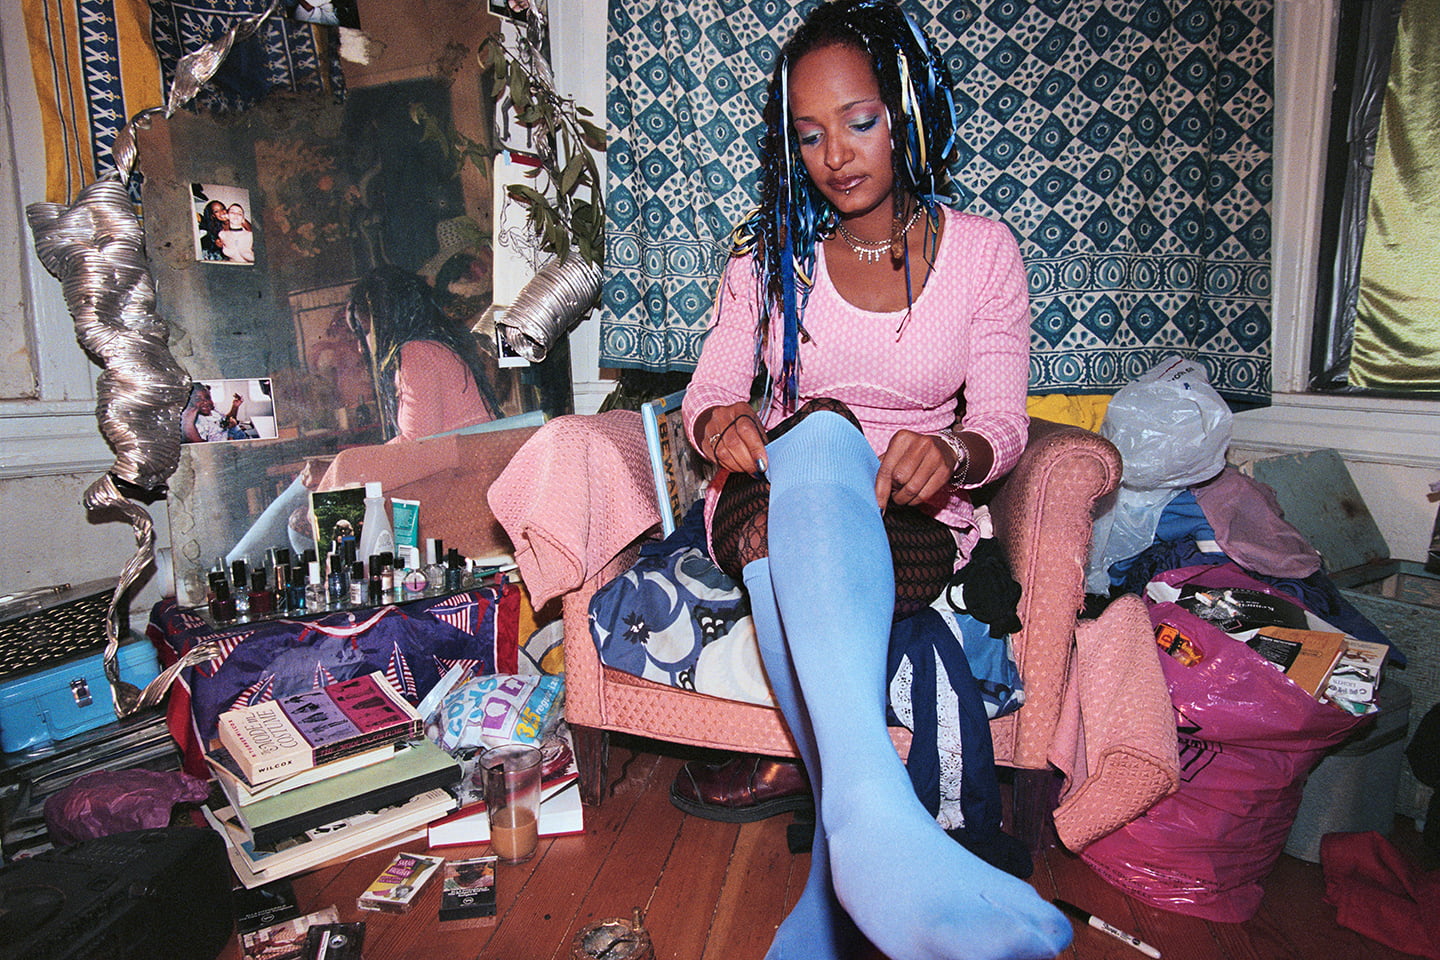 A person in pink and blue with long hair pulls up a knee-high in a messy bedroom